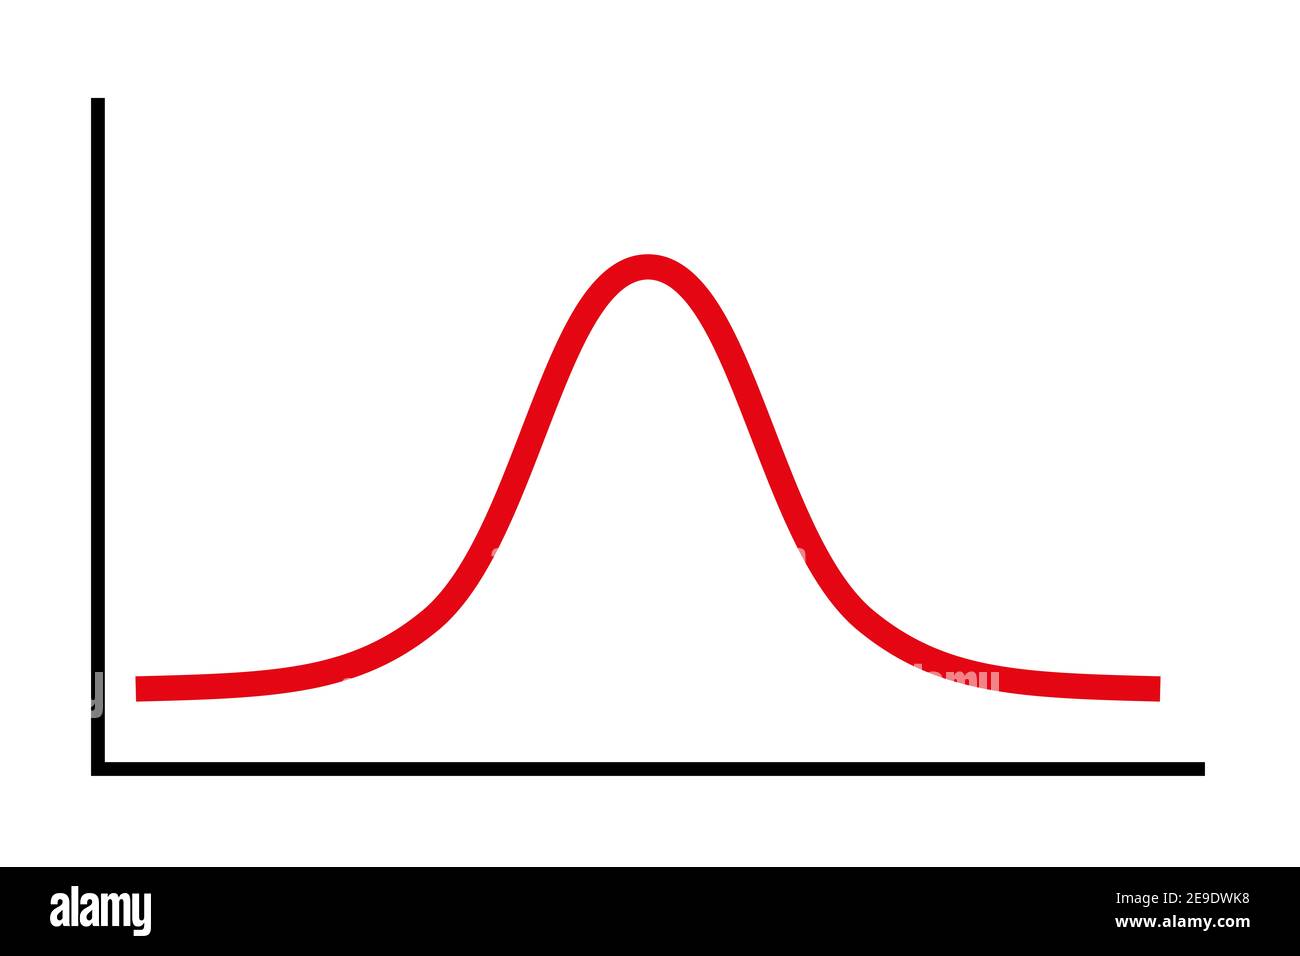 Bell curve symbol, a simplified diagram for a standard normal distribution, also called Gaussian distribution, used in probability theory. Stock Photo